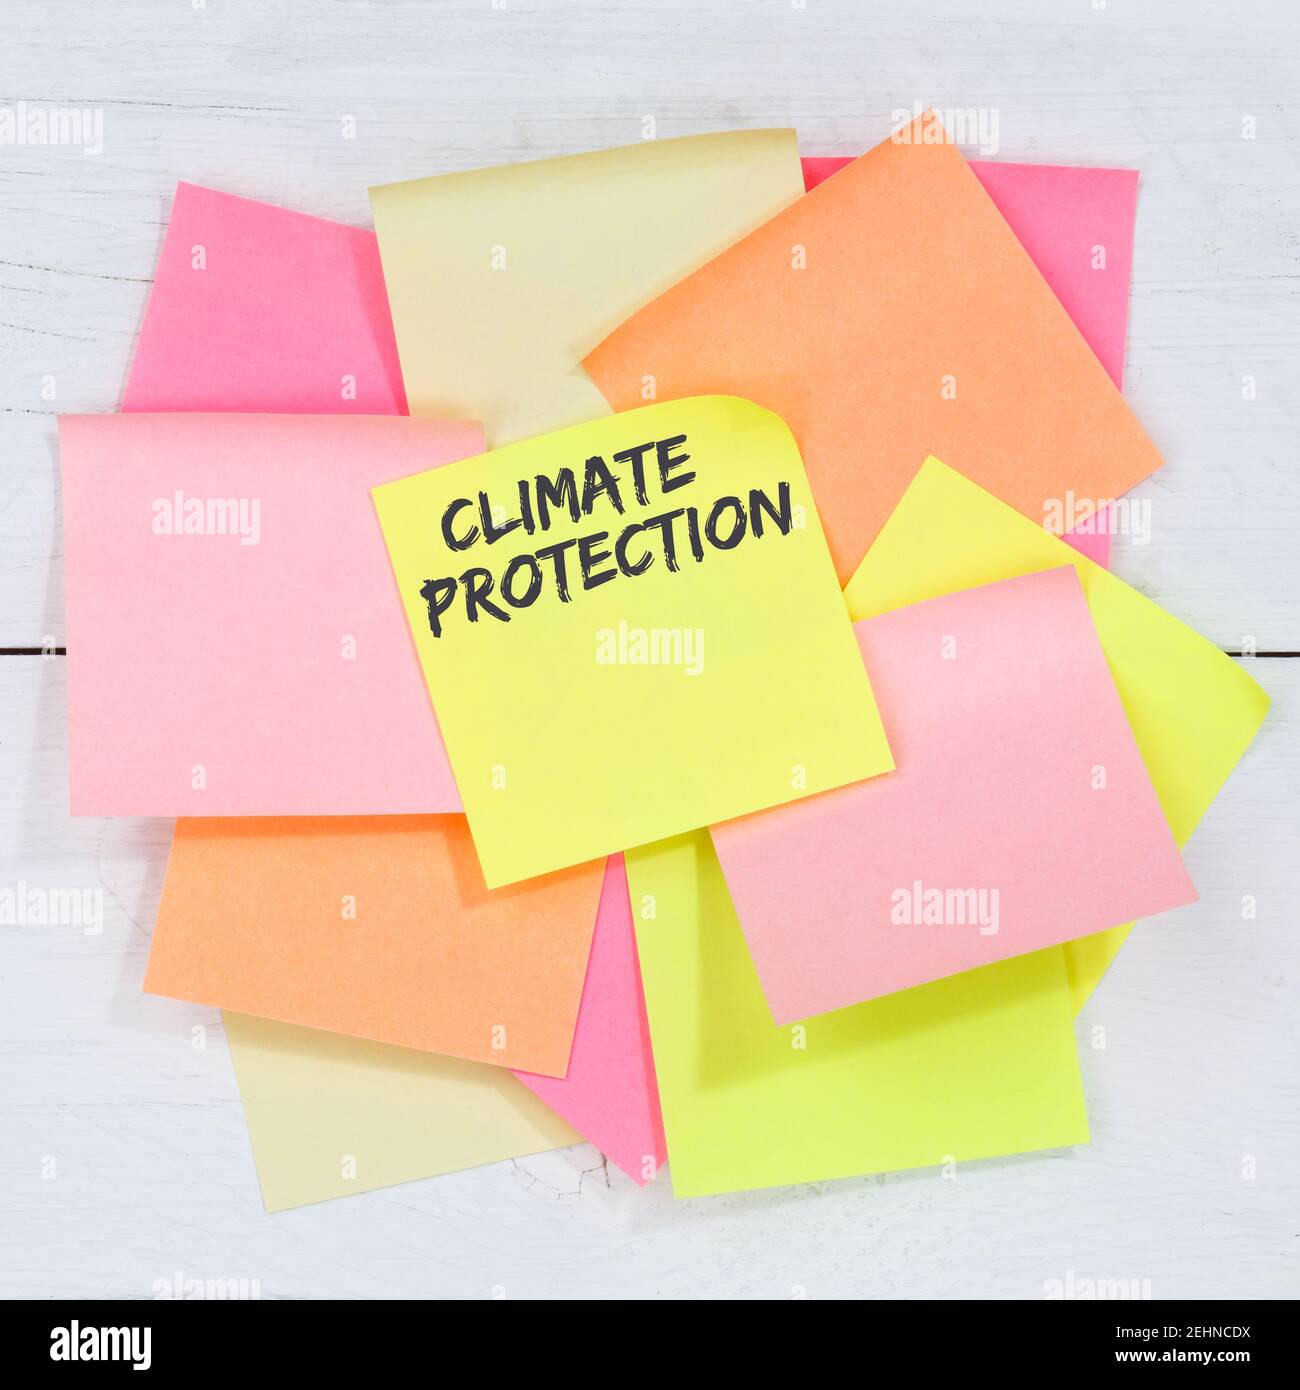 Climate protection change environment eco friendly nature conservation desk note paper notes Stock Photo